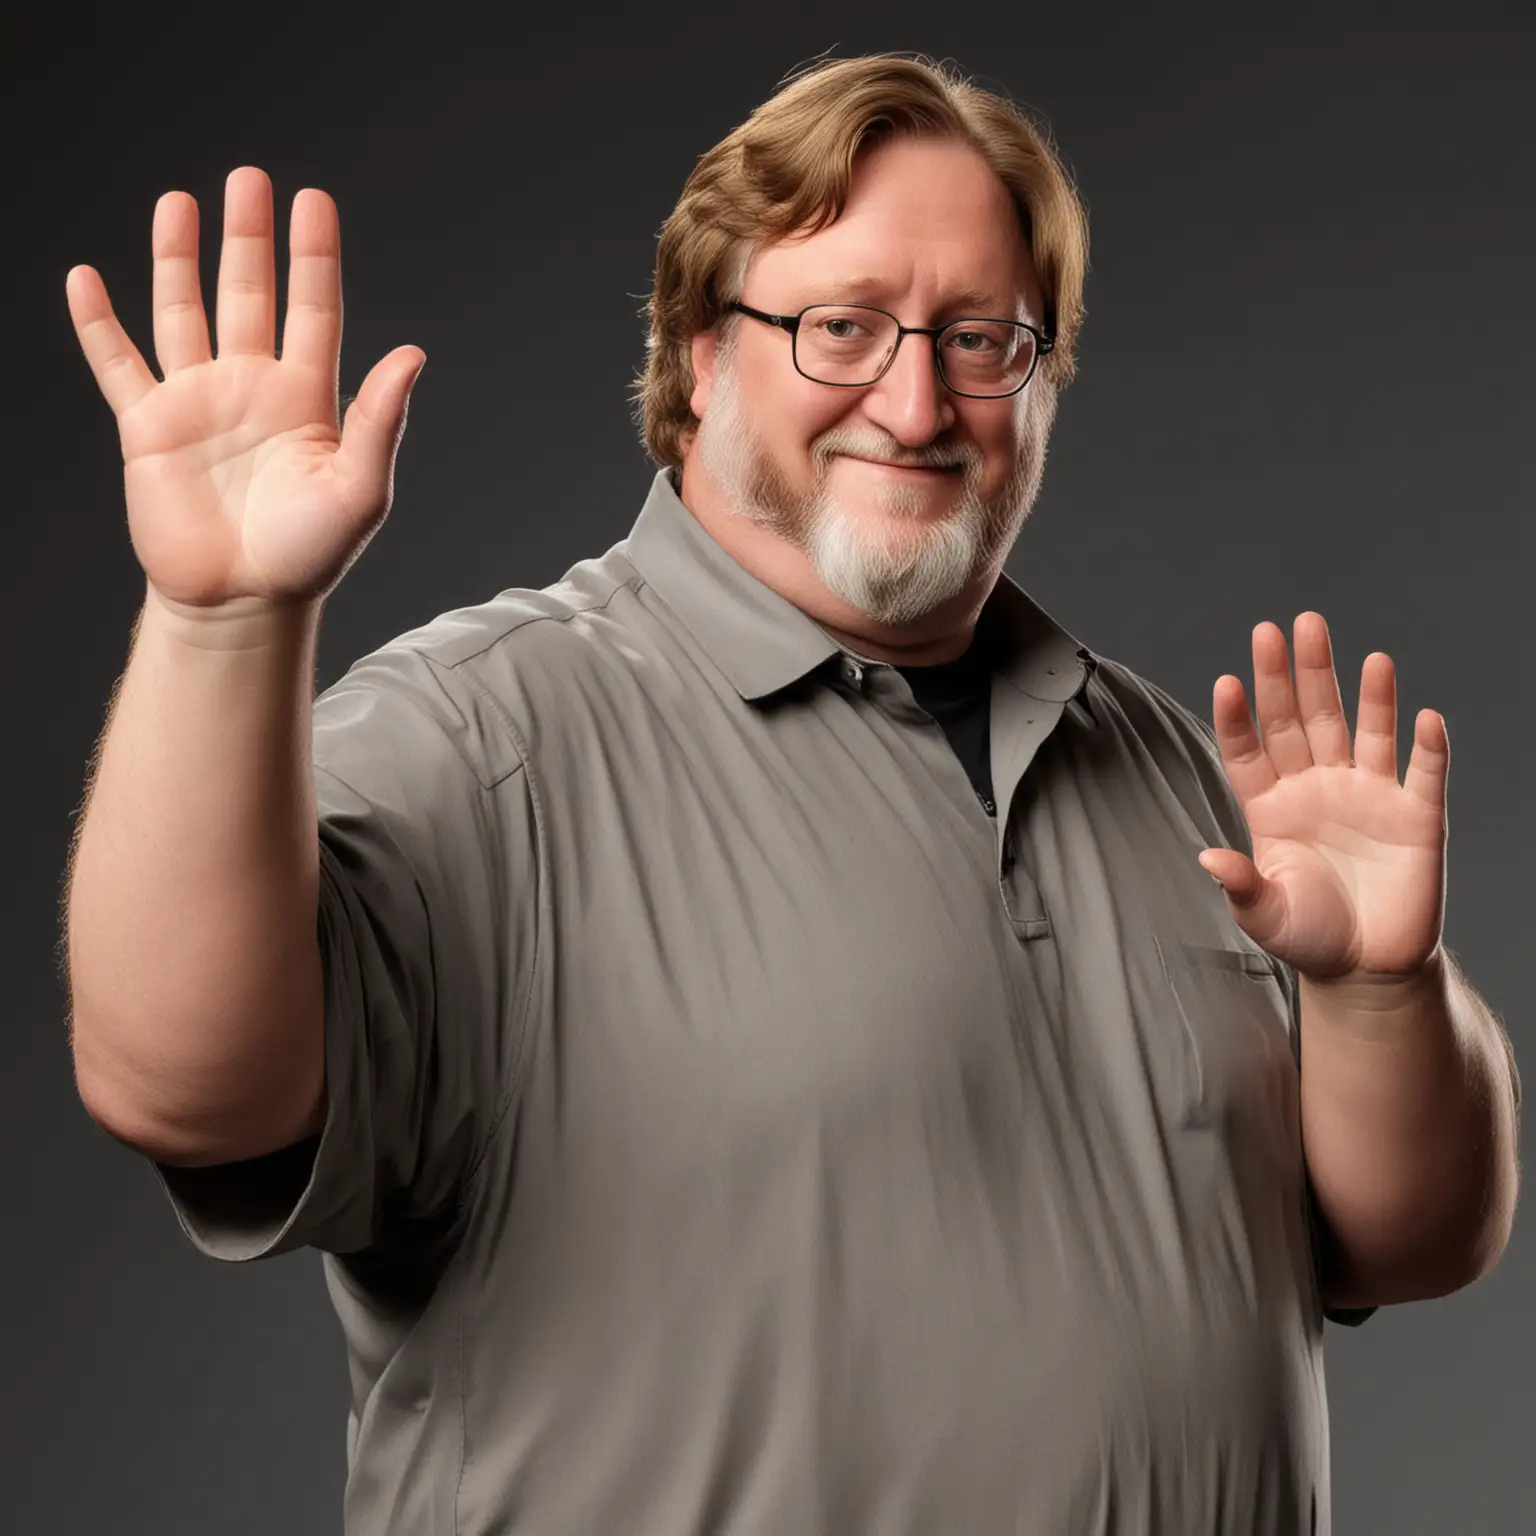 Gabe Newell waves his hand in greeting pose. 